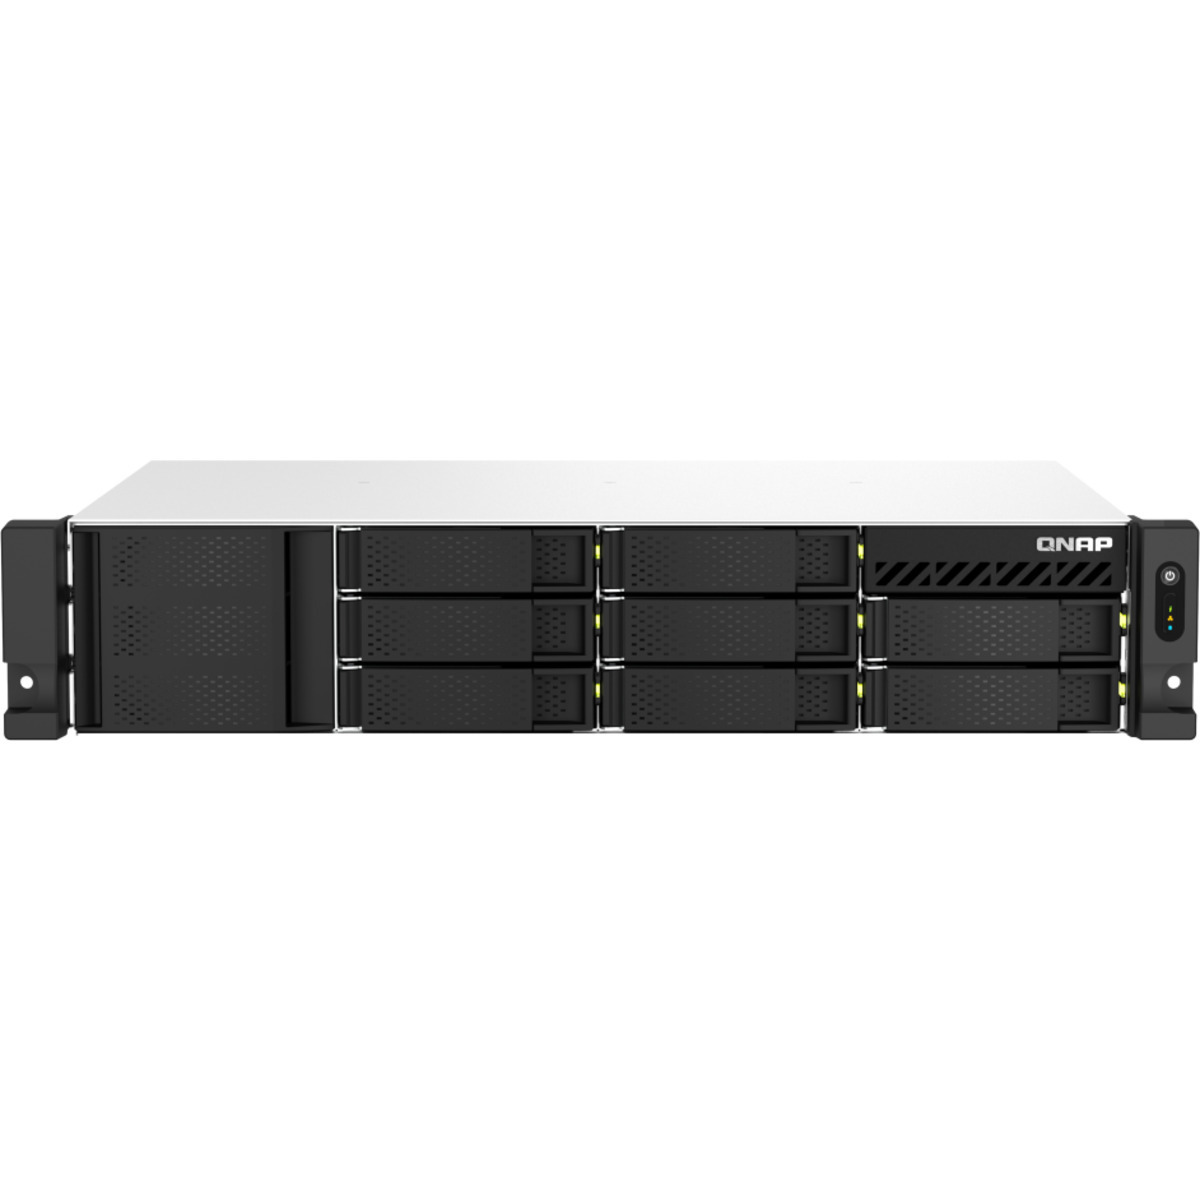 QNAP TS-873AeU RackMount 8-Bay Multimedia / Power User / Business NAS - Network Attached Storage Device Burn-In Tested Configurations - FREE RAM UPGRADE TS-873AeU